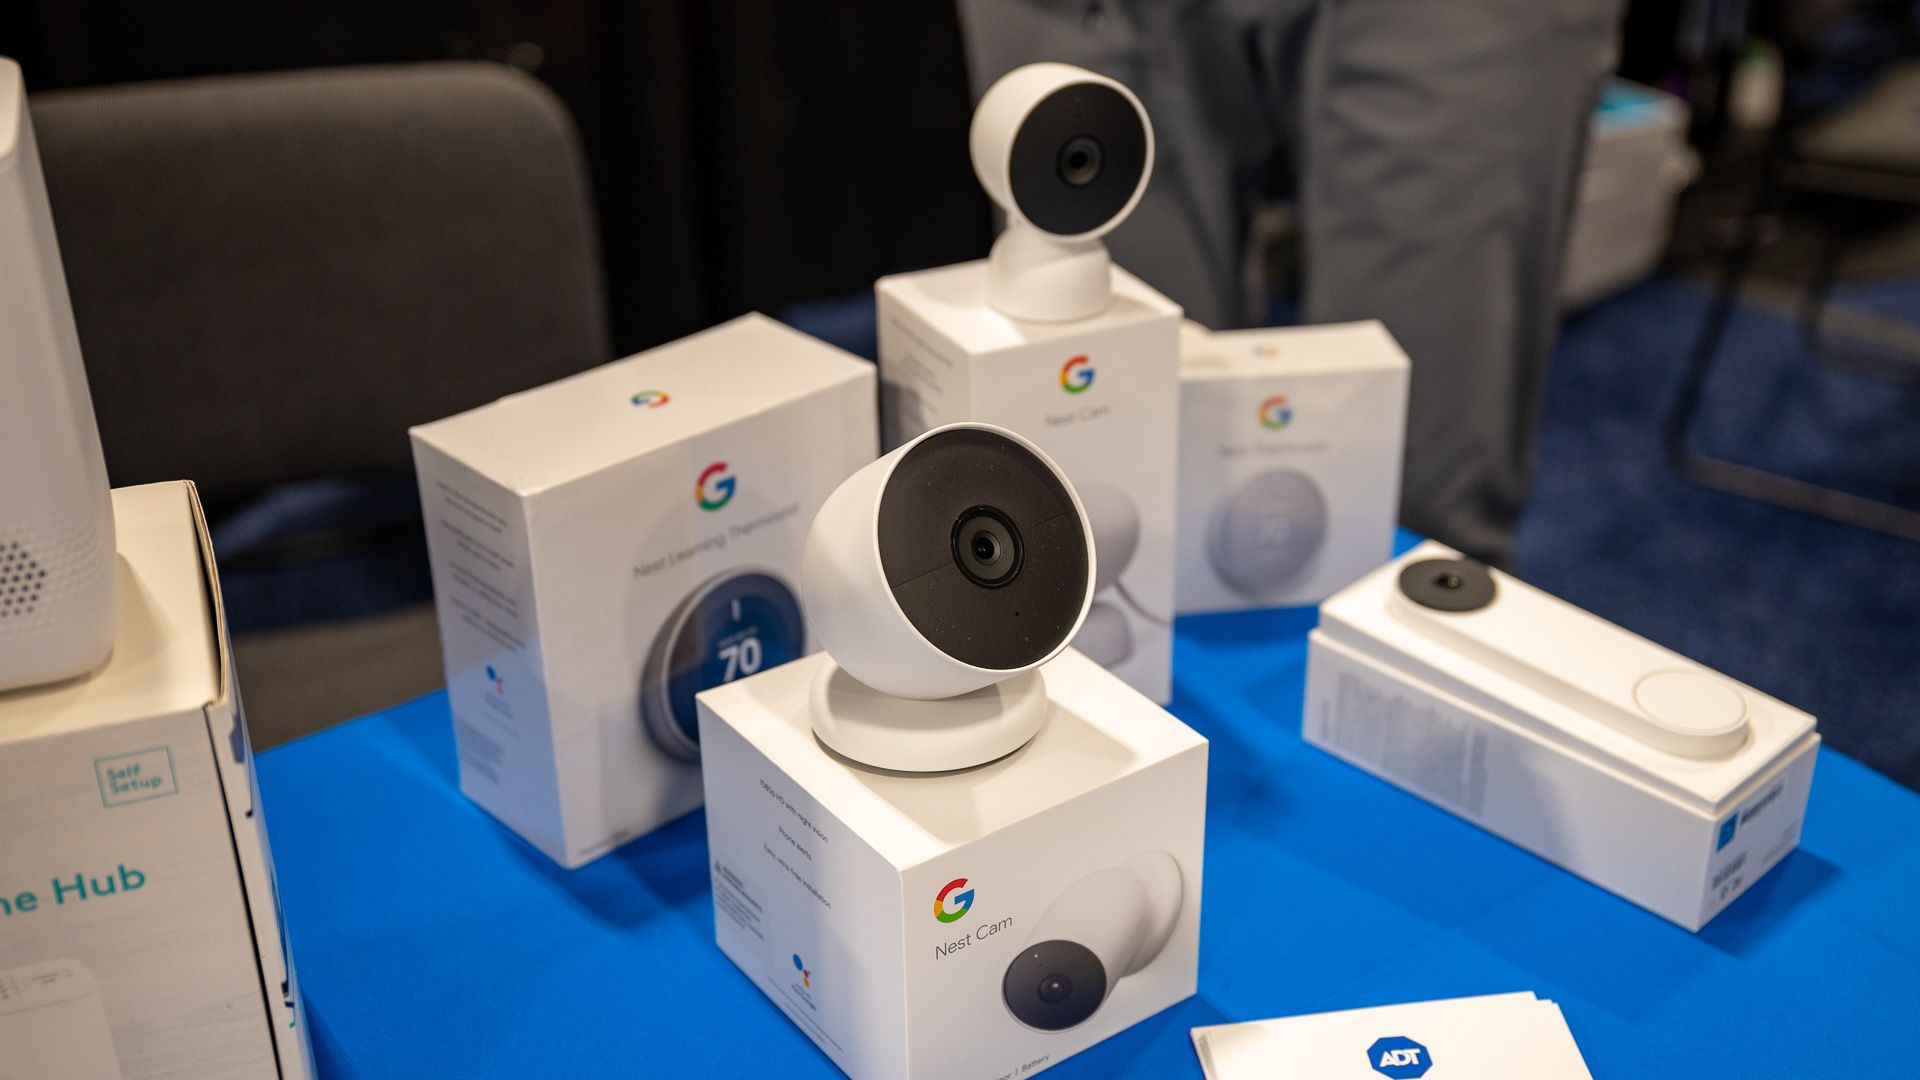 Google indoor and outdoor Nest Cam, Learning Thermostat, and Hello doorbell at ADT's CES 2023 booth